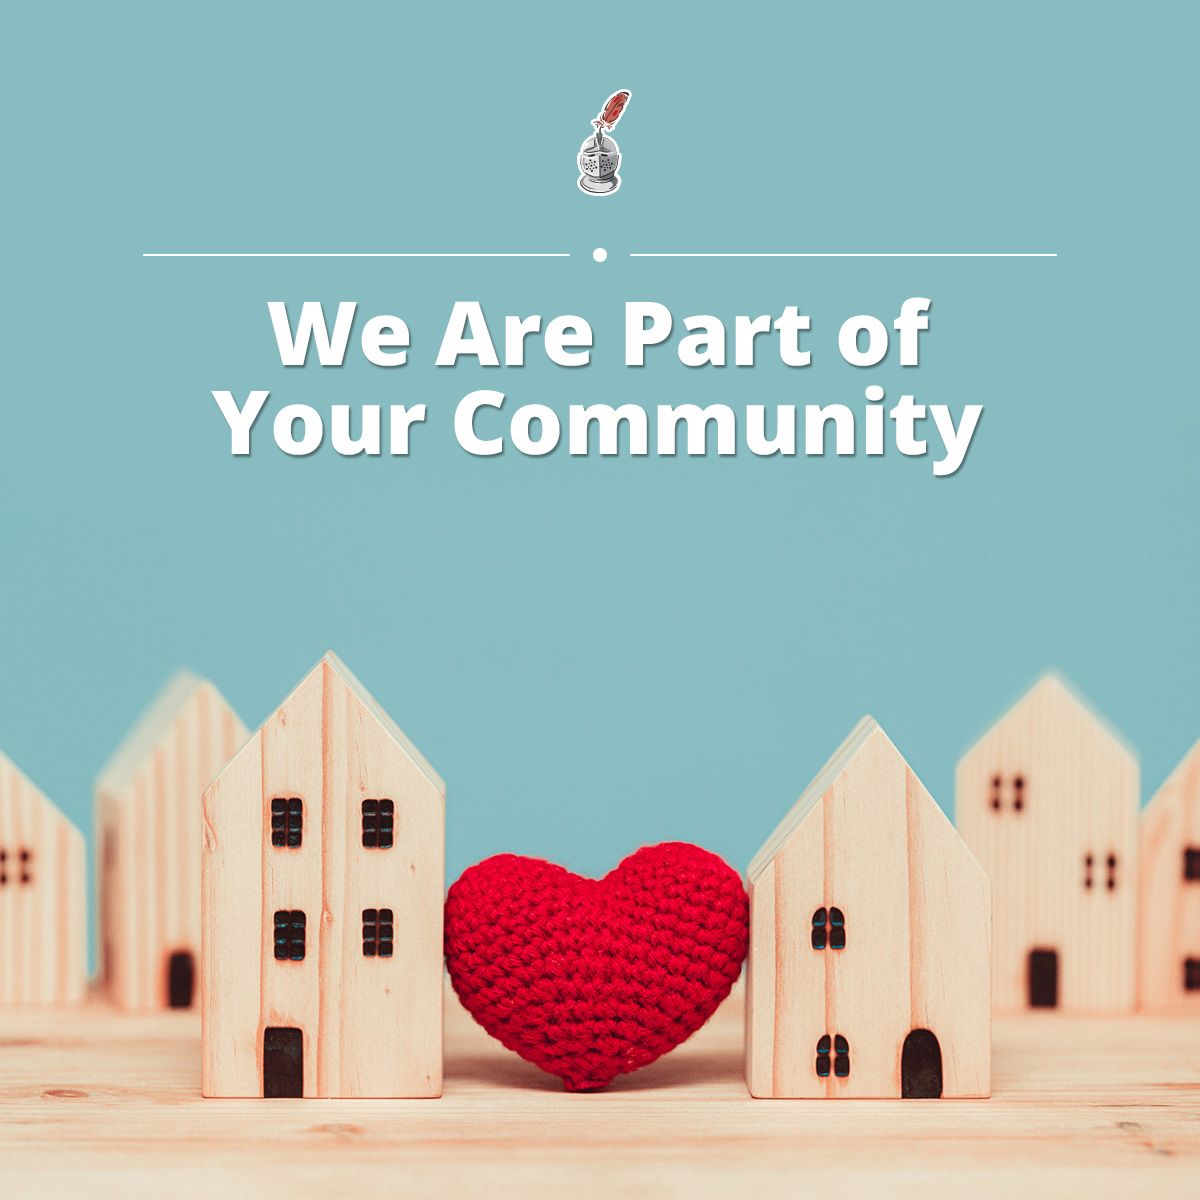 We Are Part of Your Community